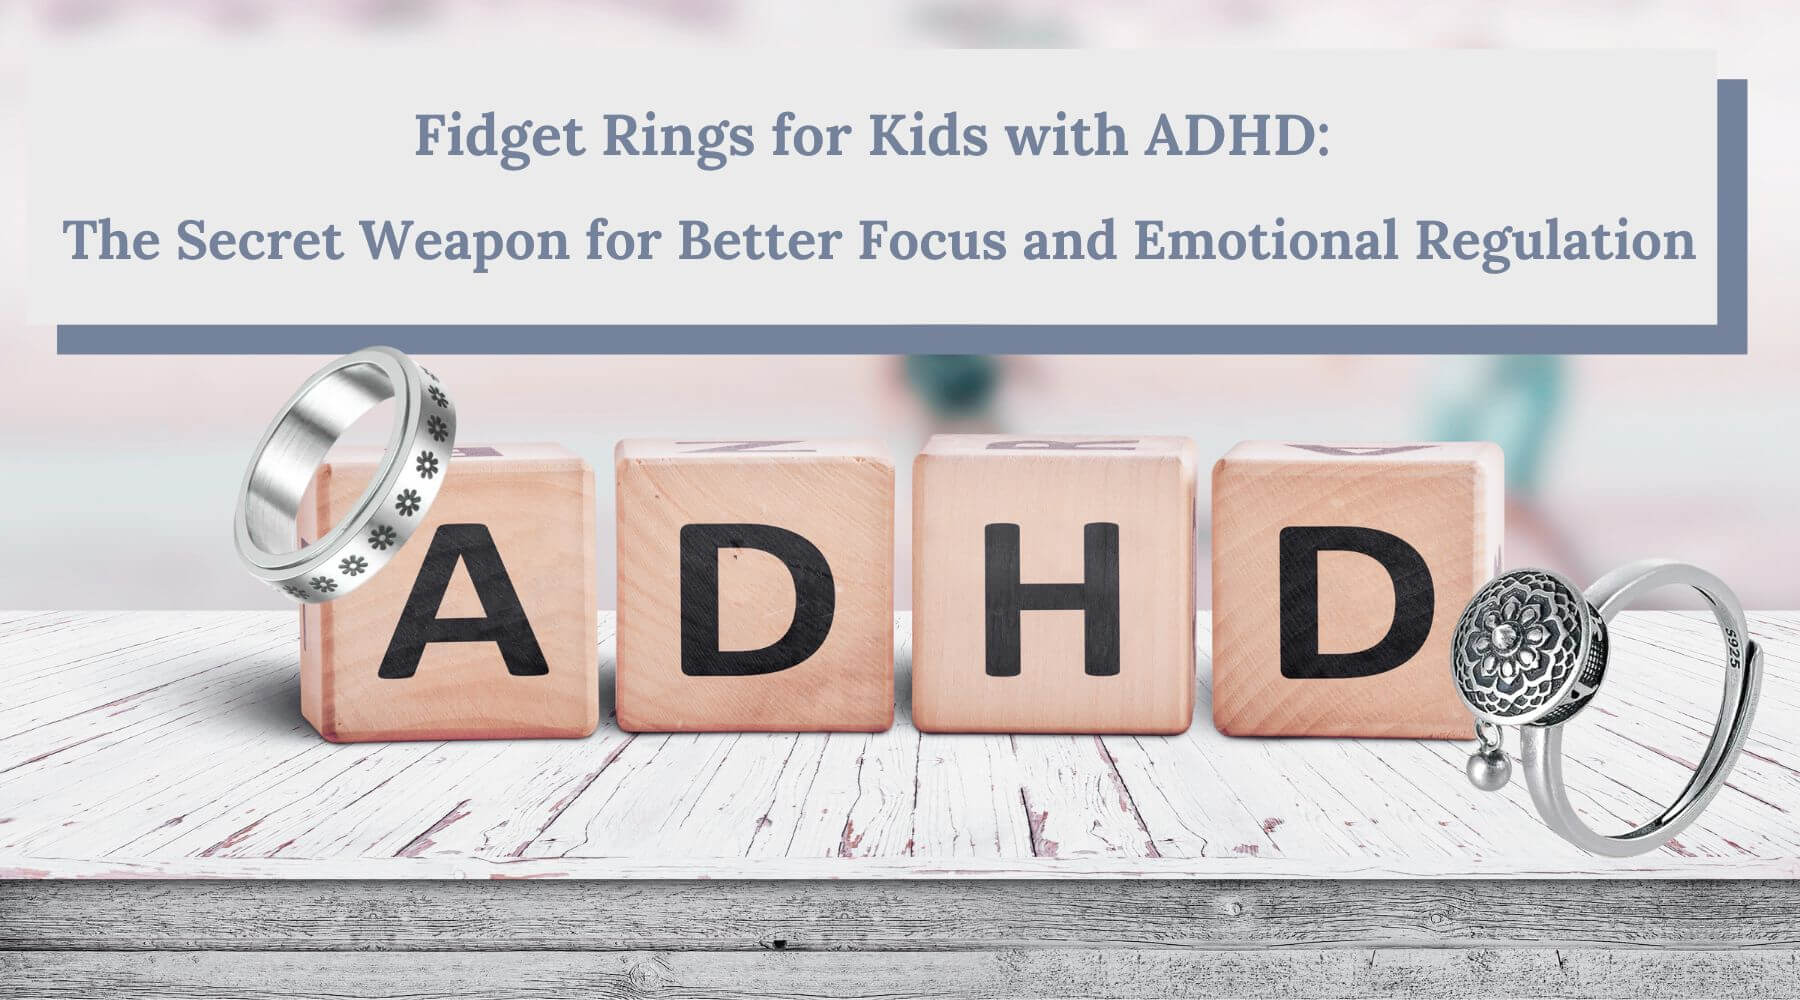 ADHD written on wooden blocks on a wooden table